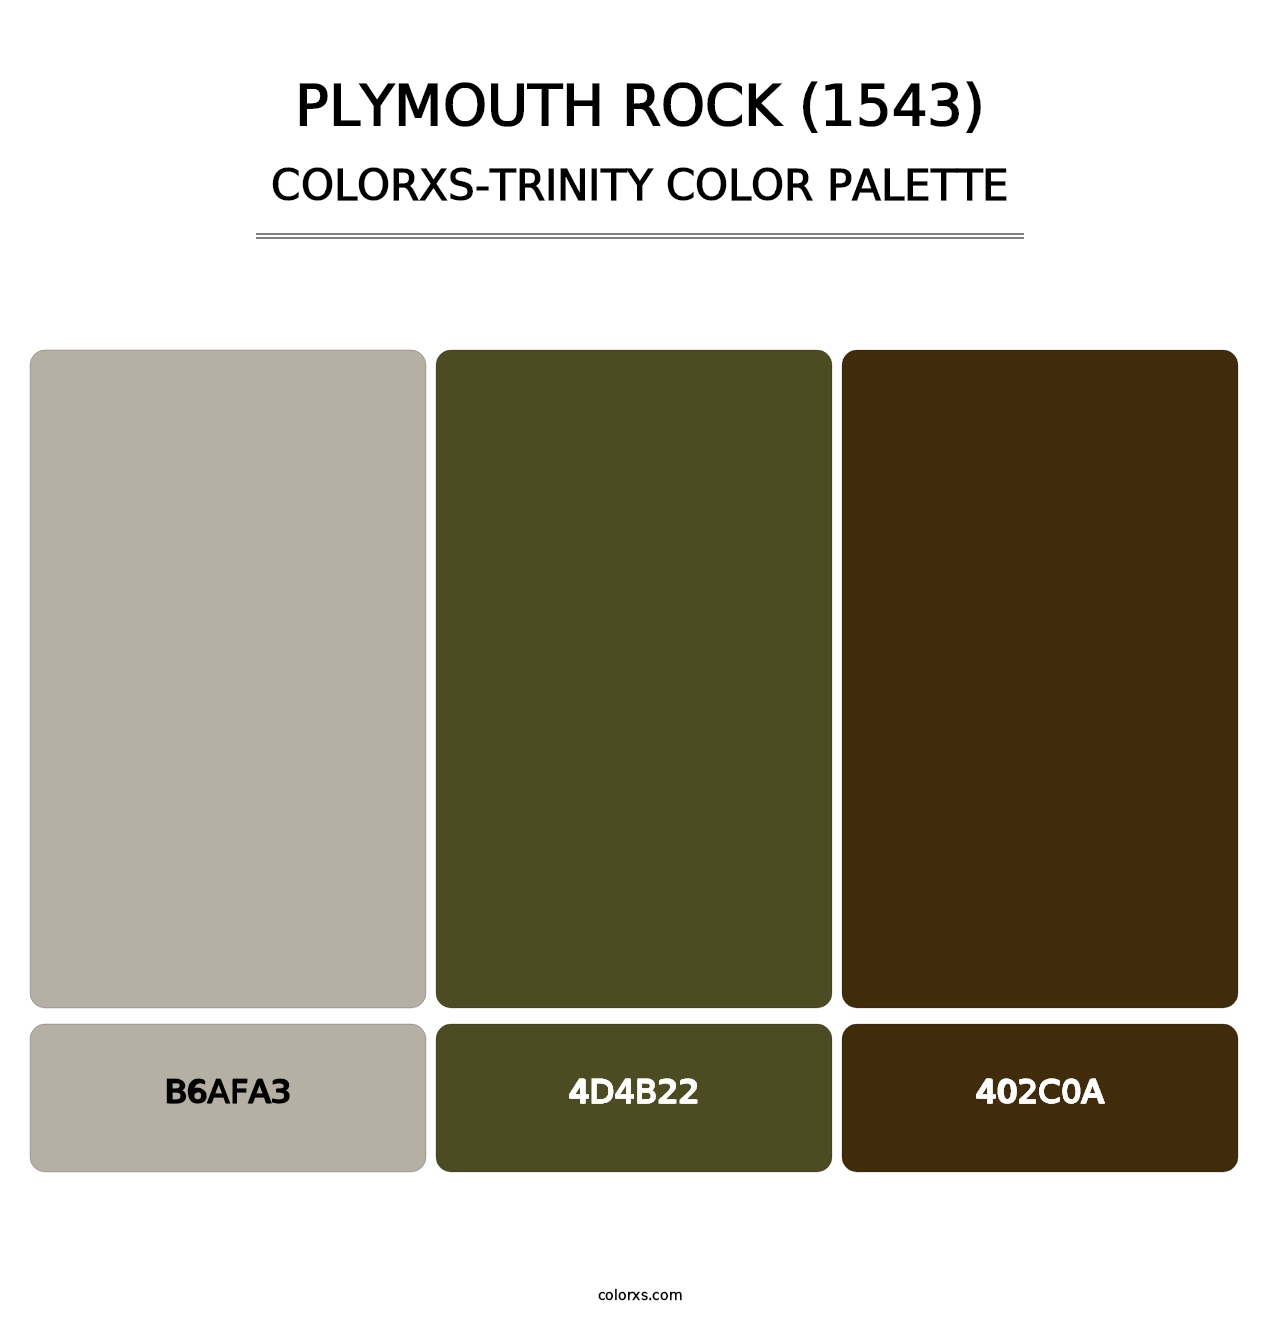 Plymouth Rock (1543) - Colorxs Trinity Palette